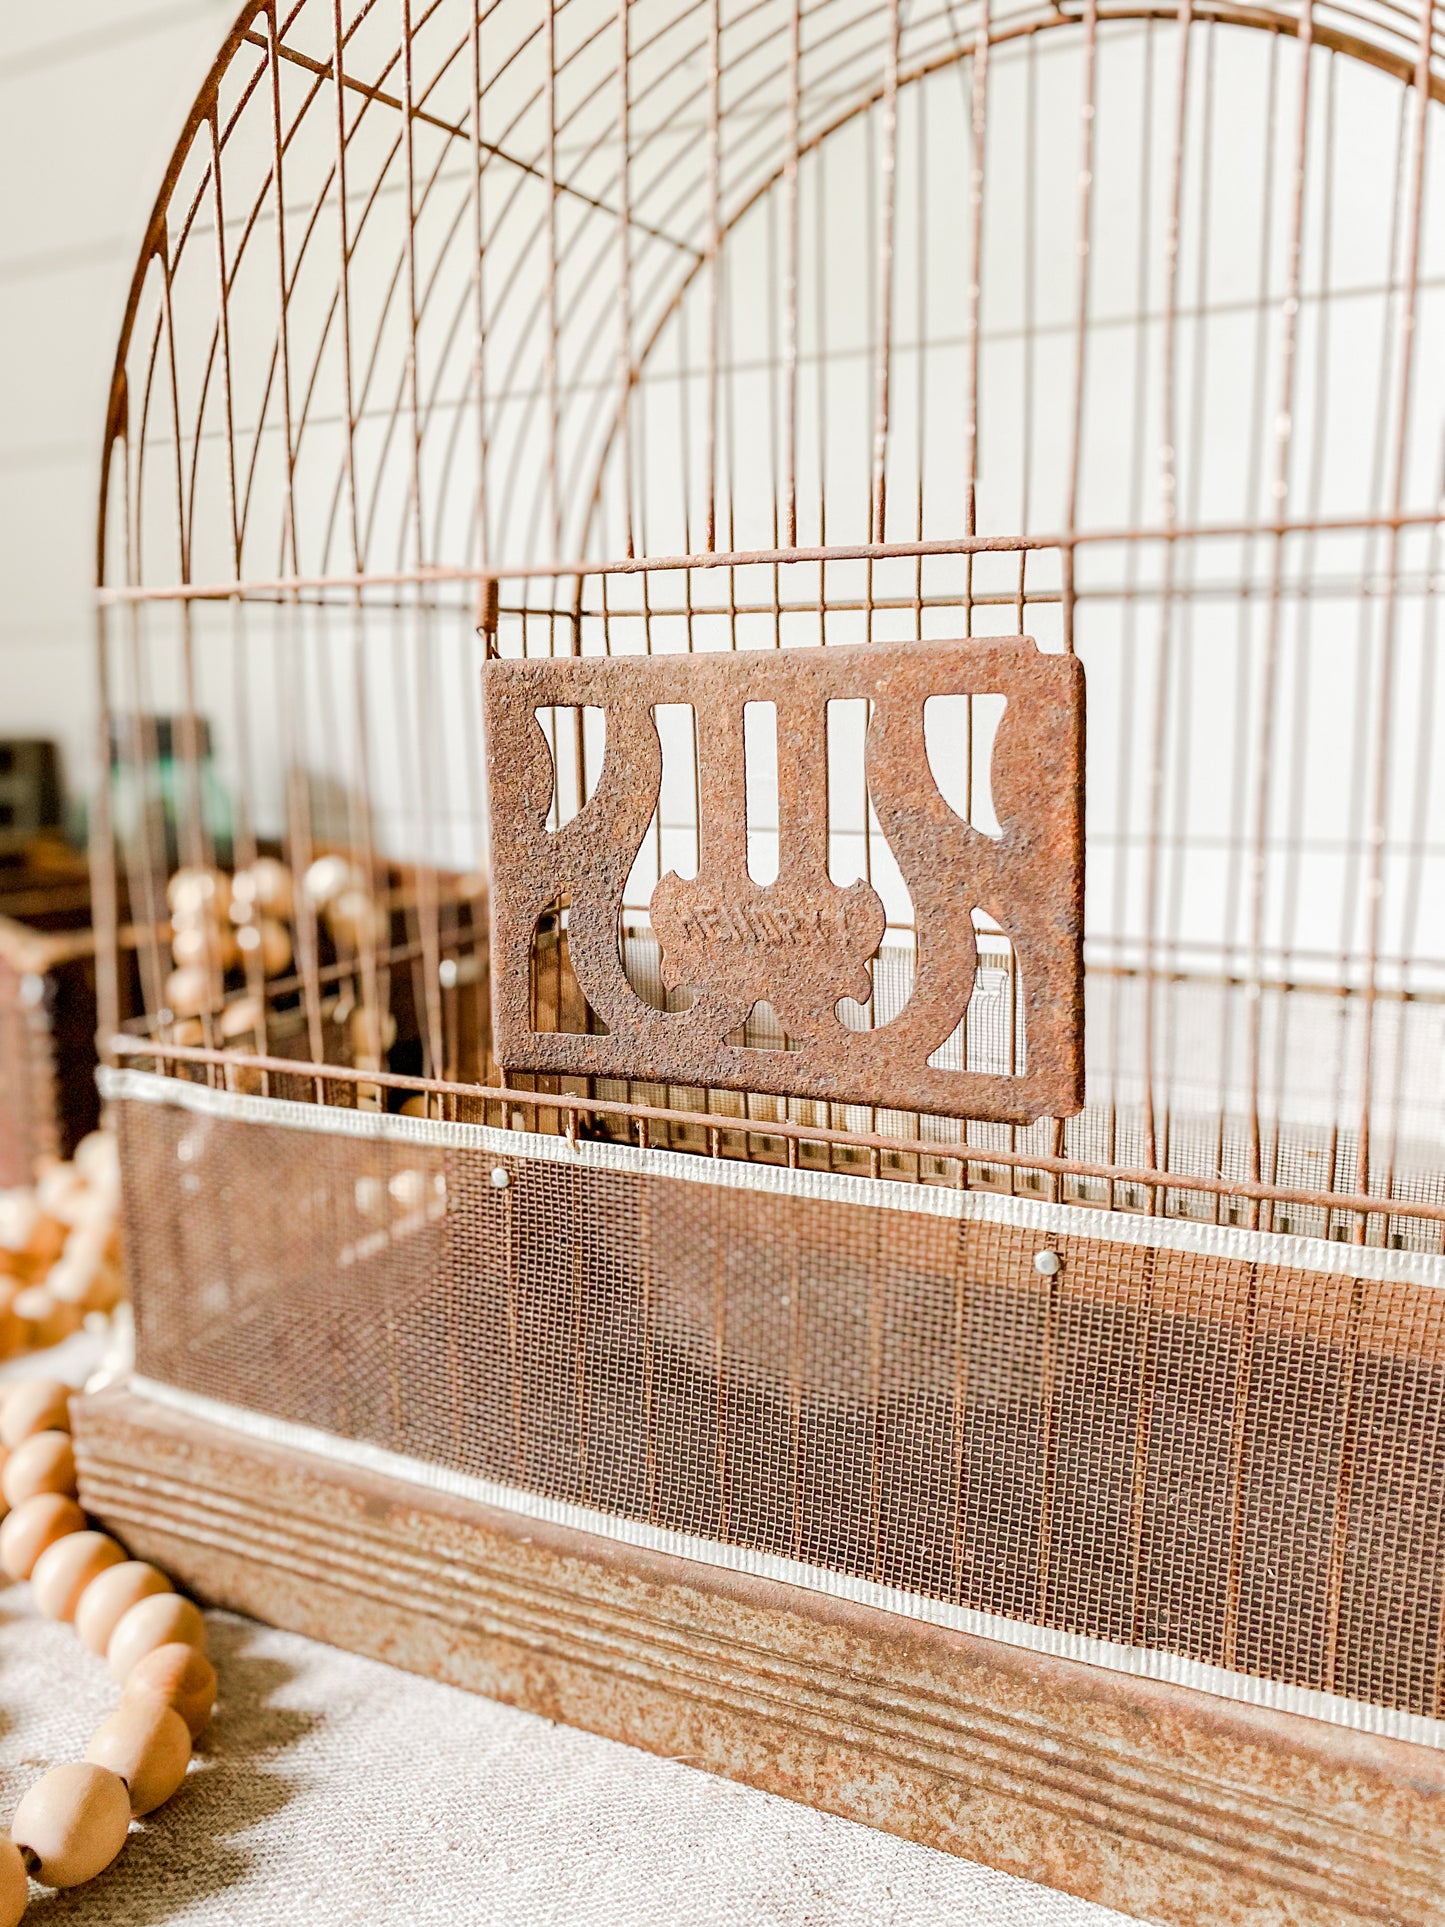 Vintage Rustic Hendryx Metal Bird Cage with Removable Bottom